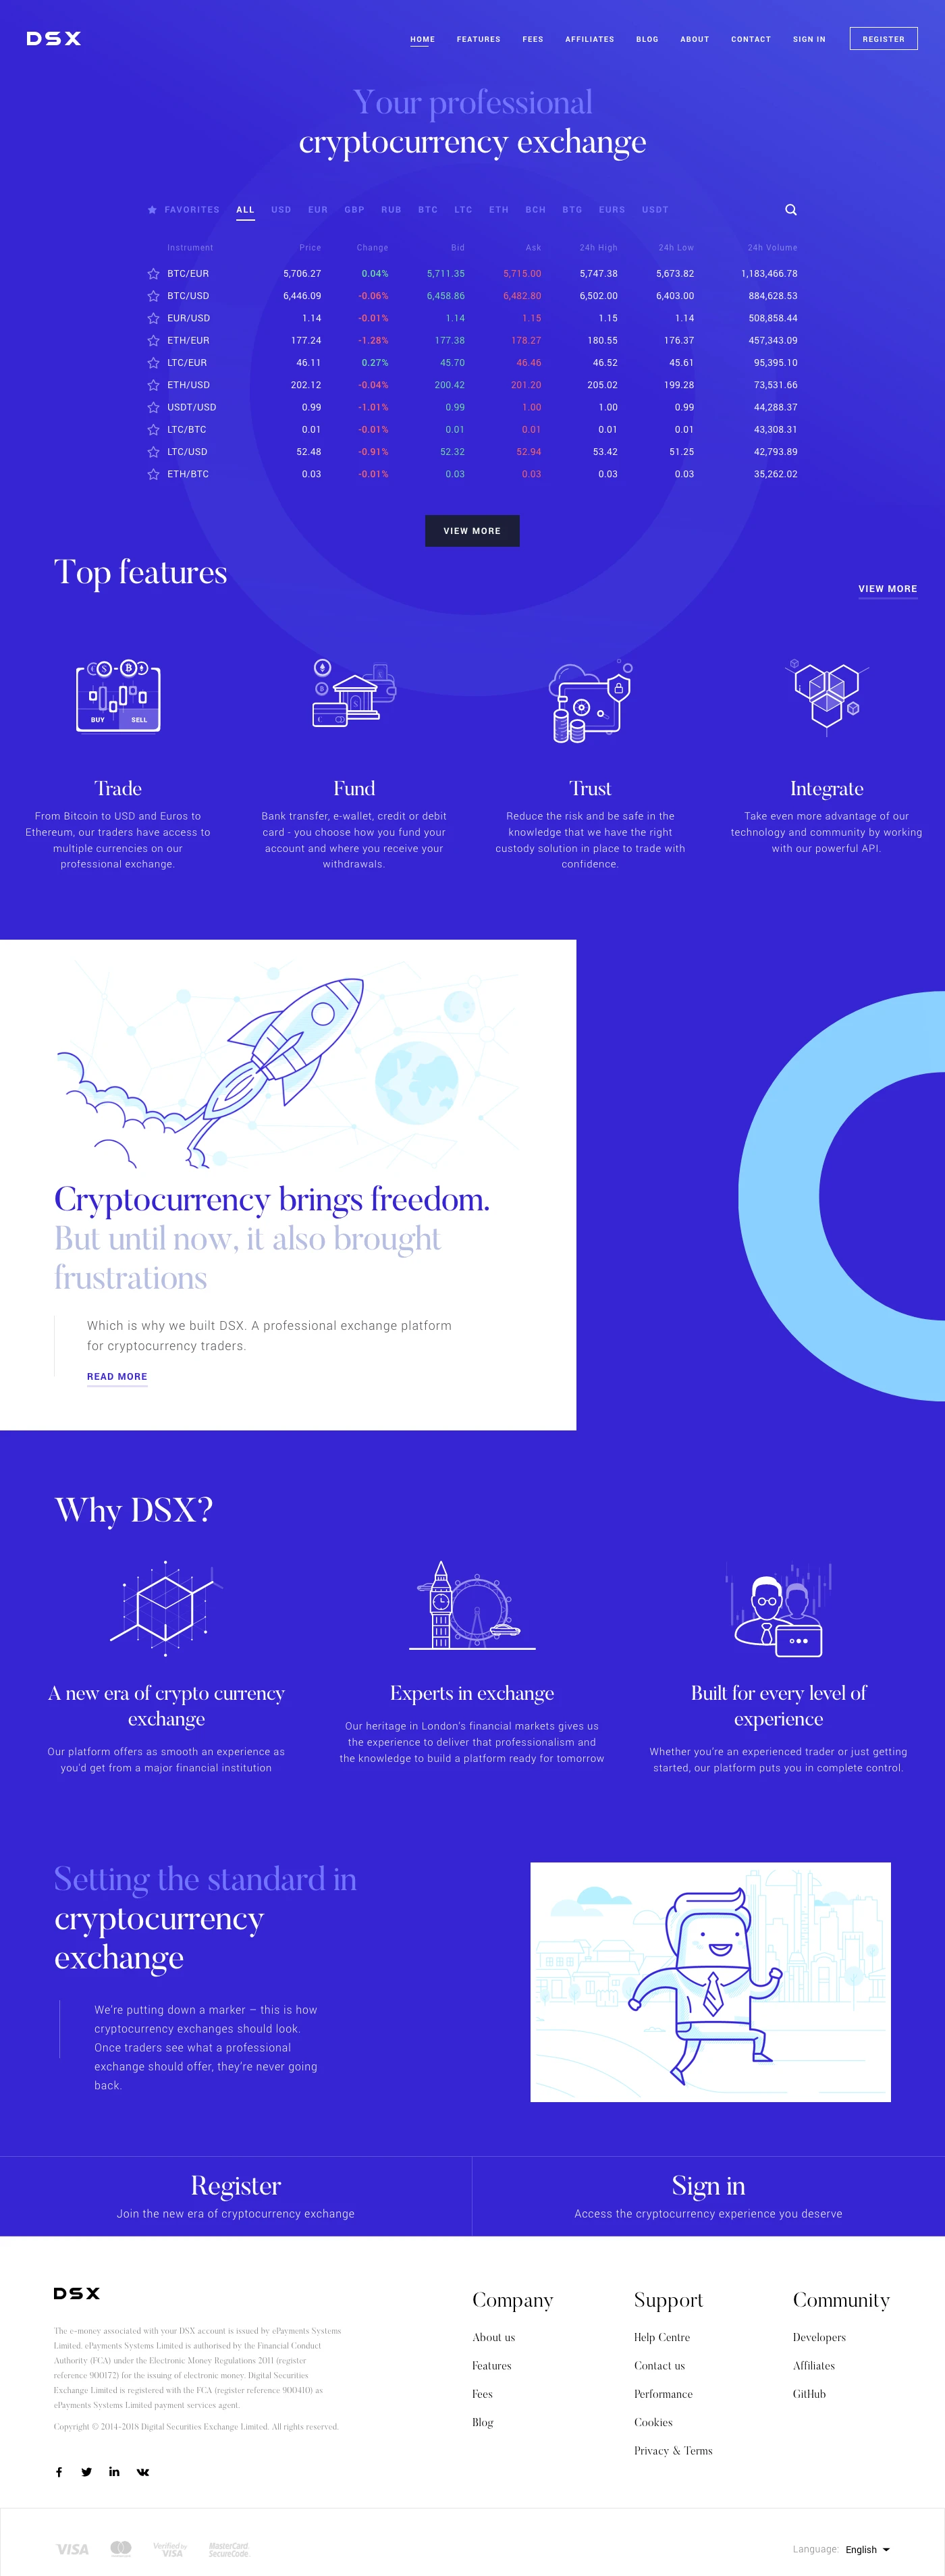 DSX Landing Page Example: Your professional cryptocurrency exchange